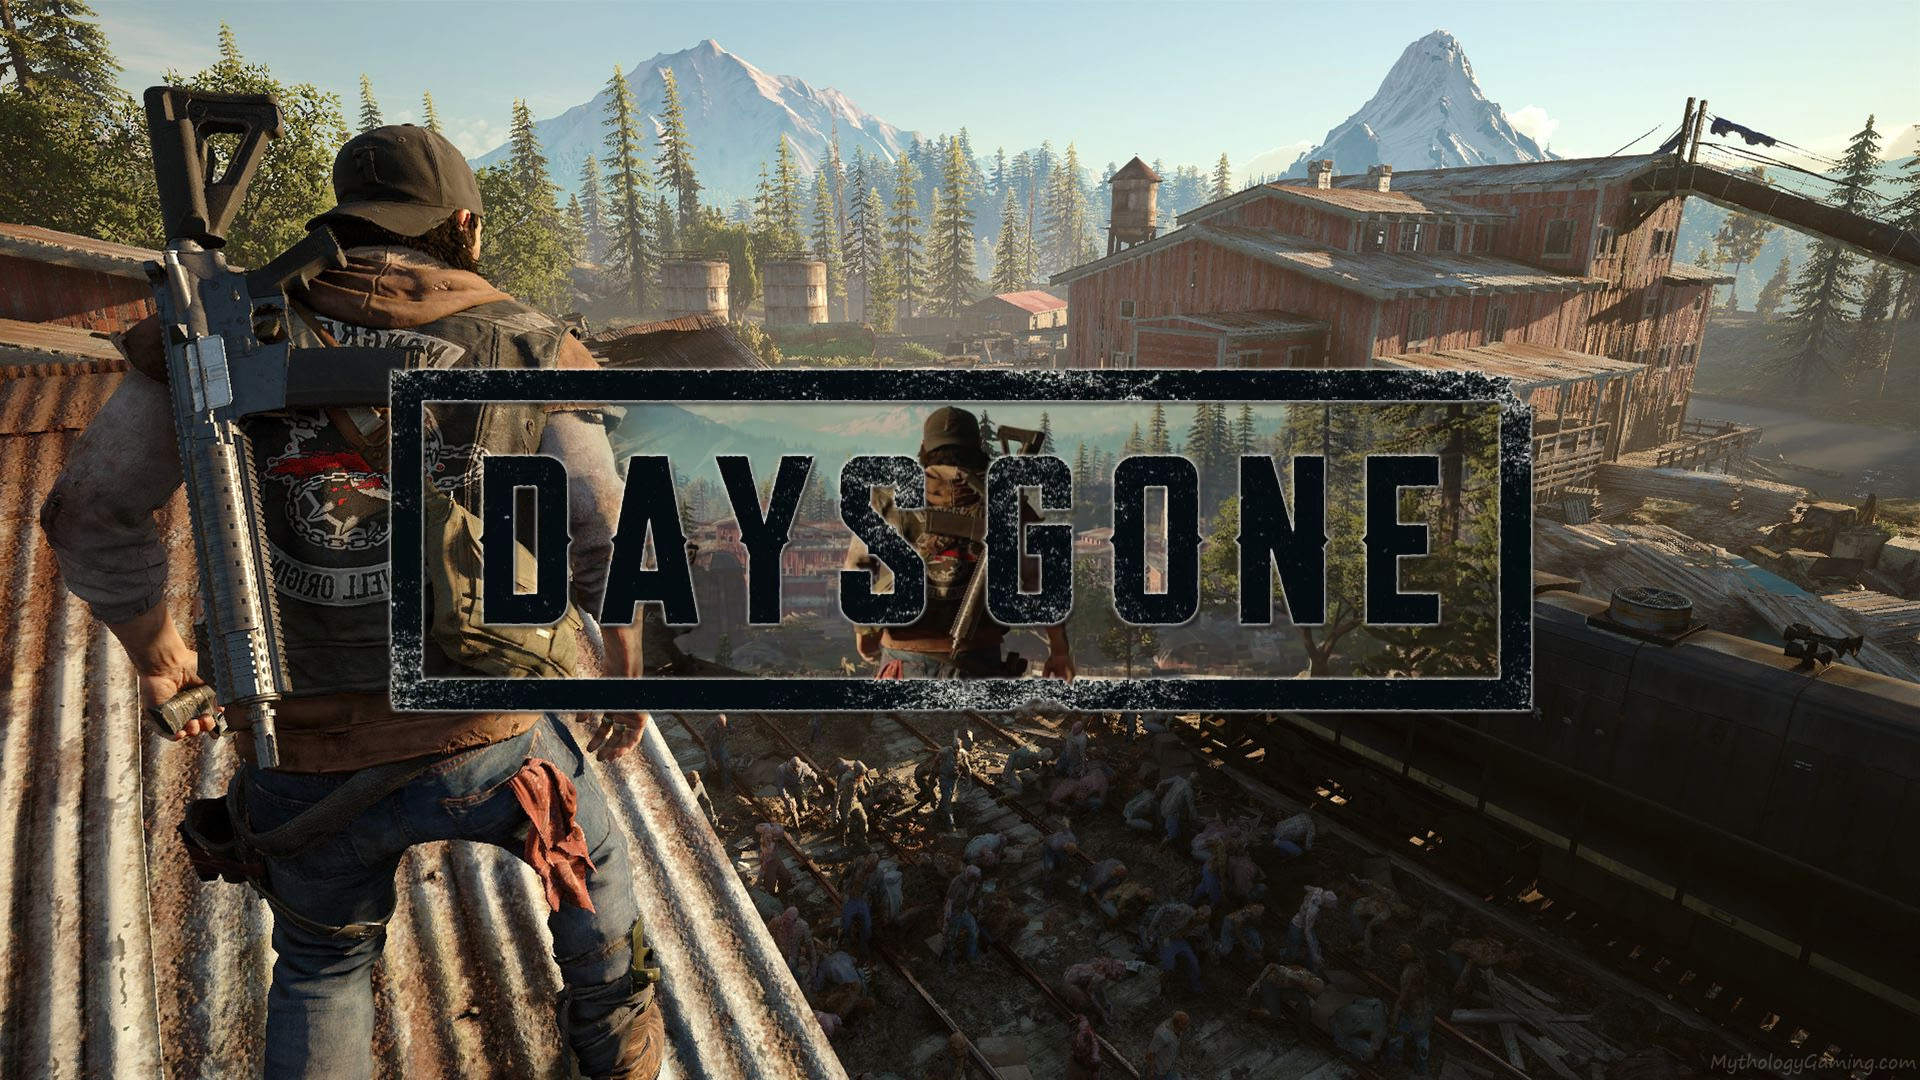 Days Gone Game Wallpaper Hd - 2018 Ps4 Game Releases - HD Wallpaper 